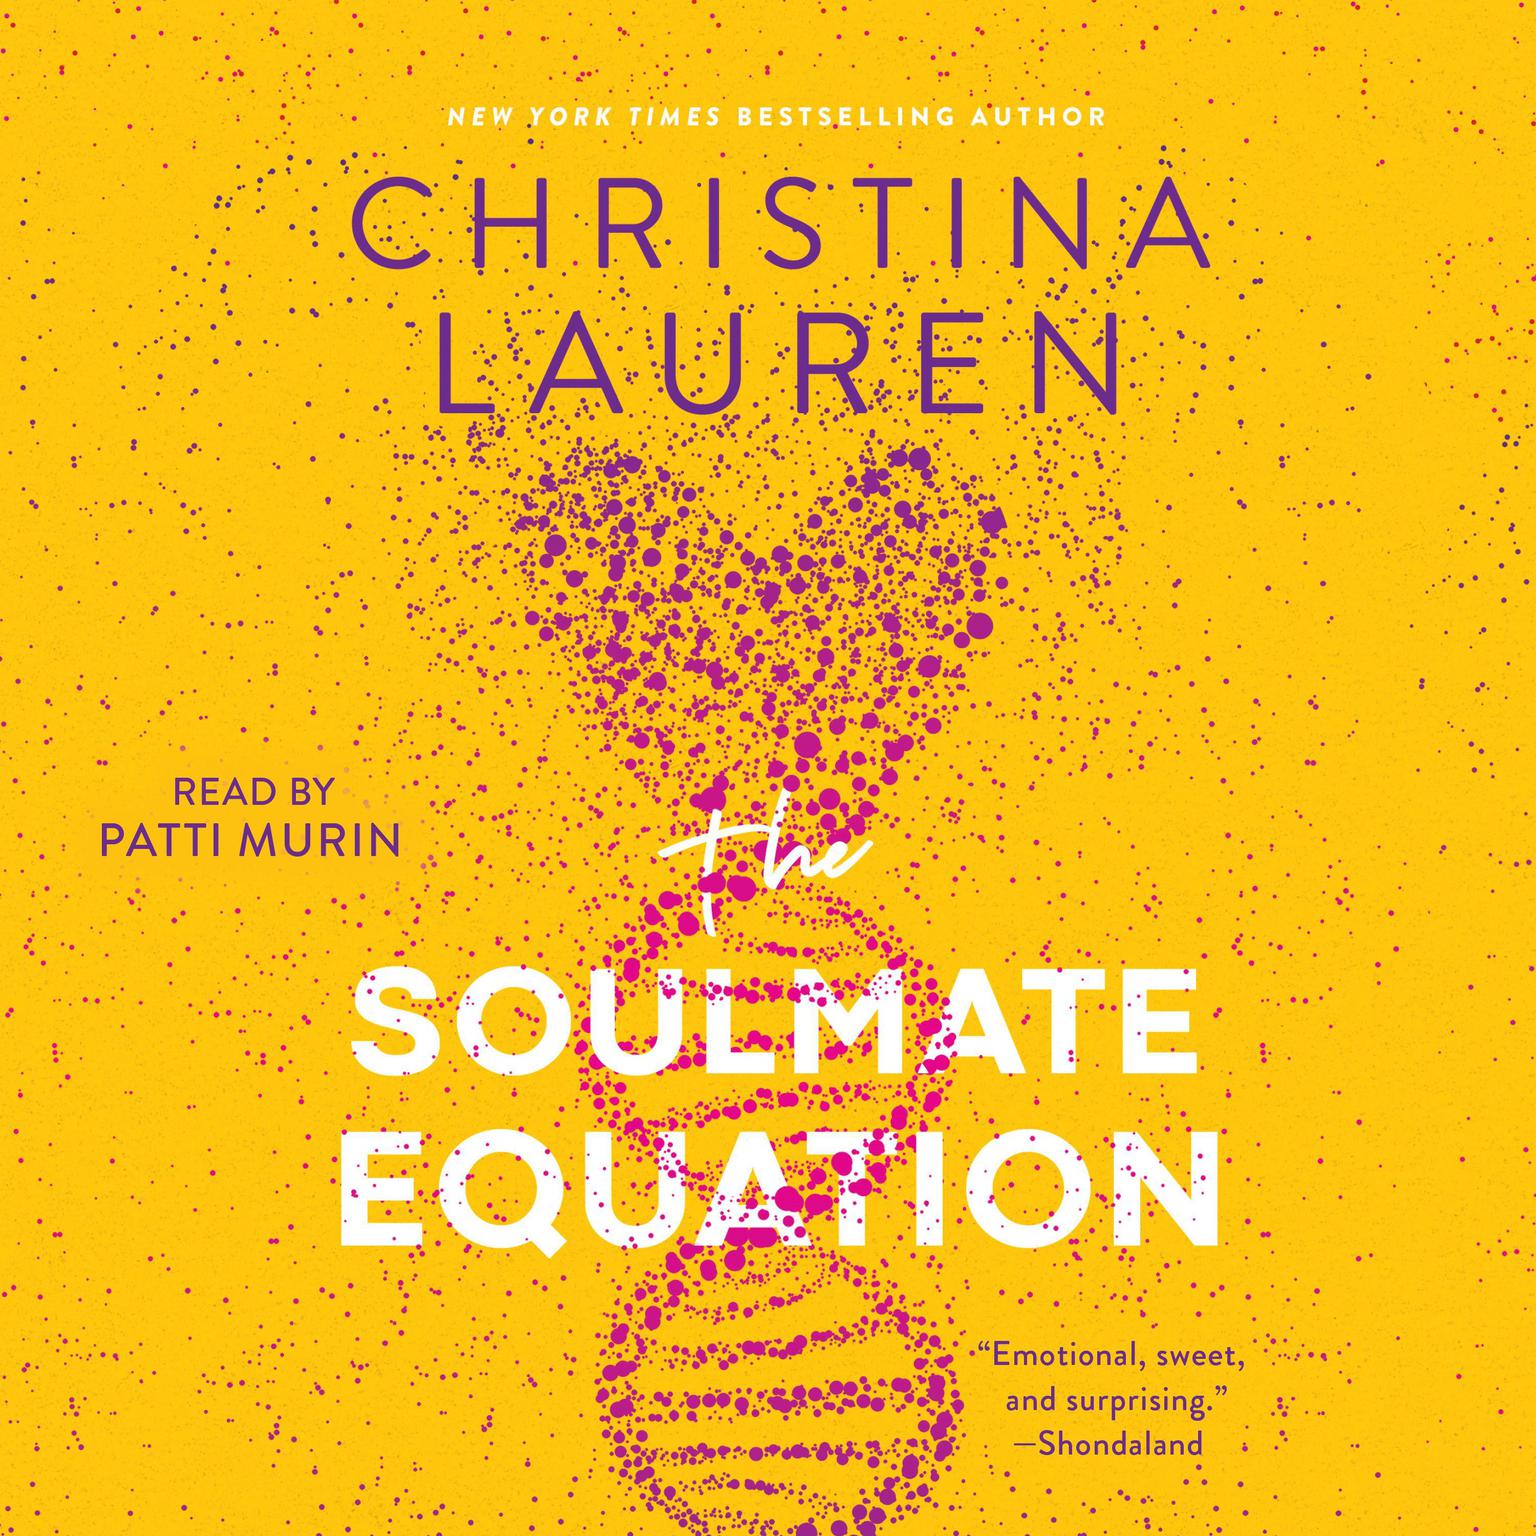 Soulmate Equation (2021, Gallery Books)